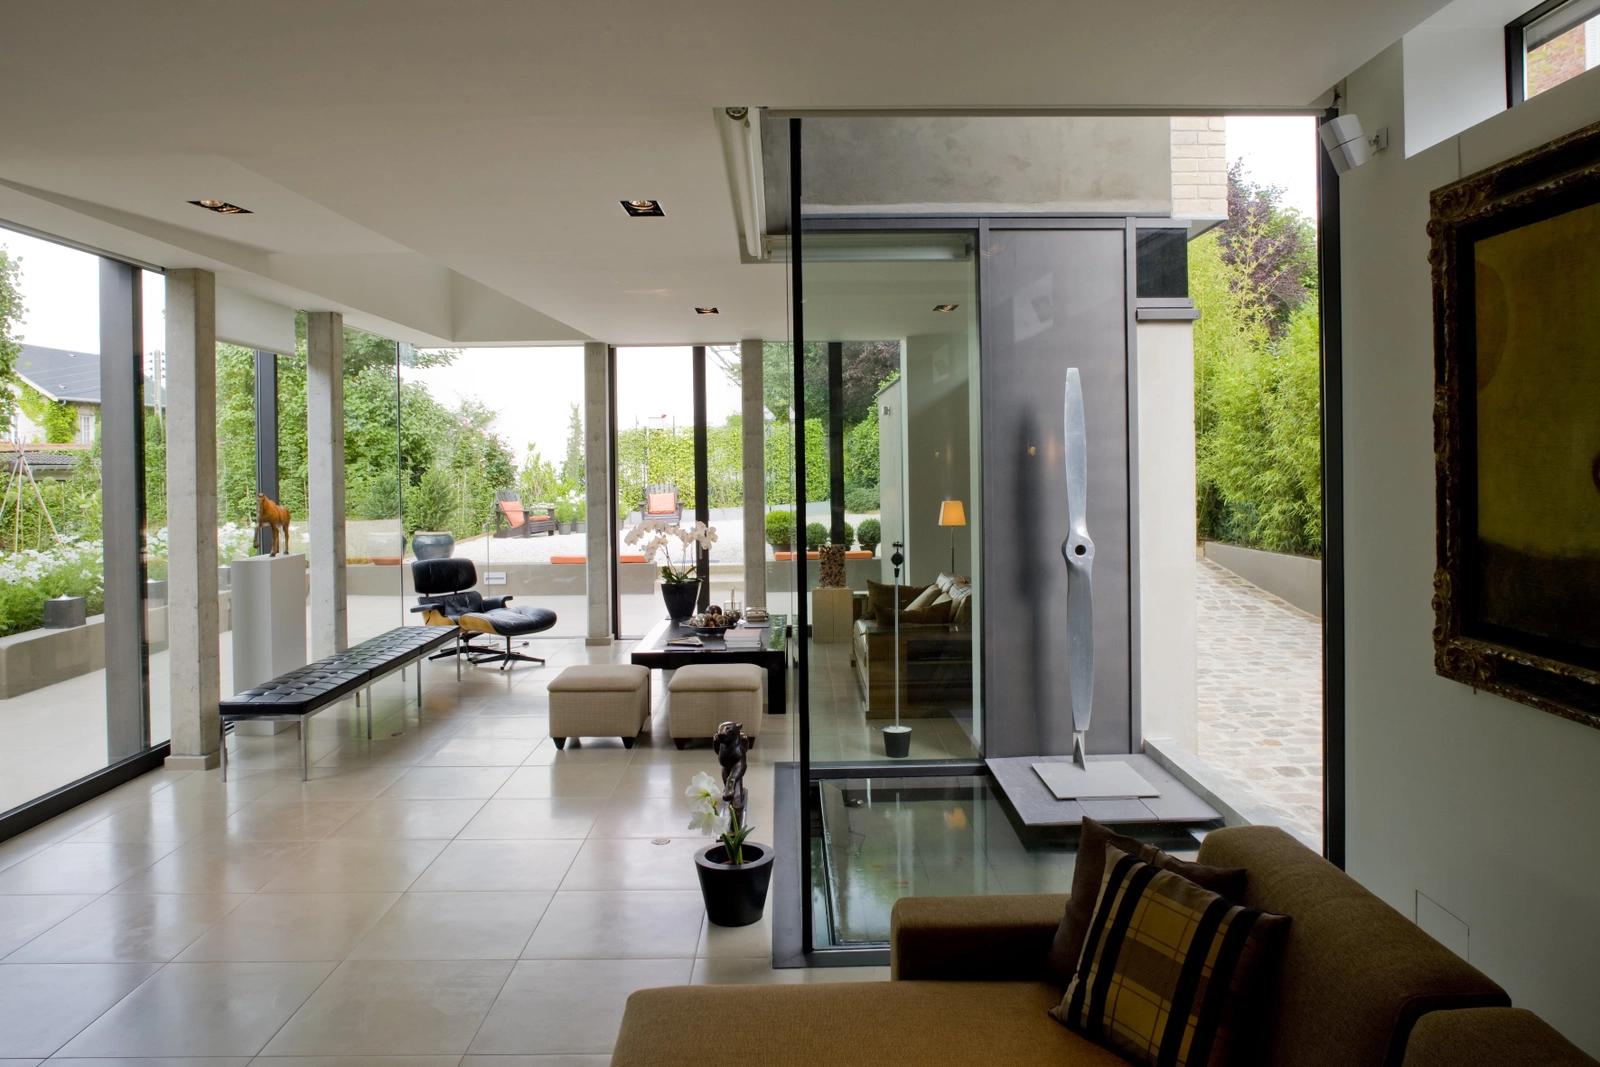 Space Fully glazed onto a magnificent garden - 3